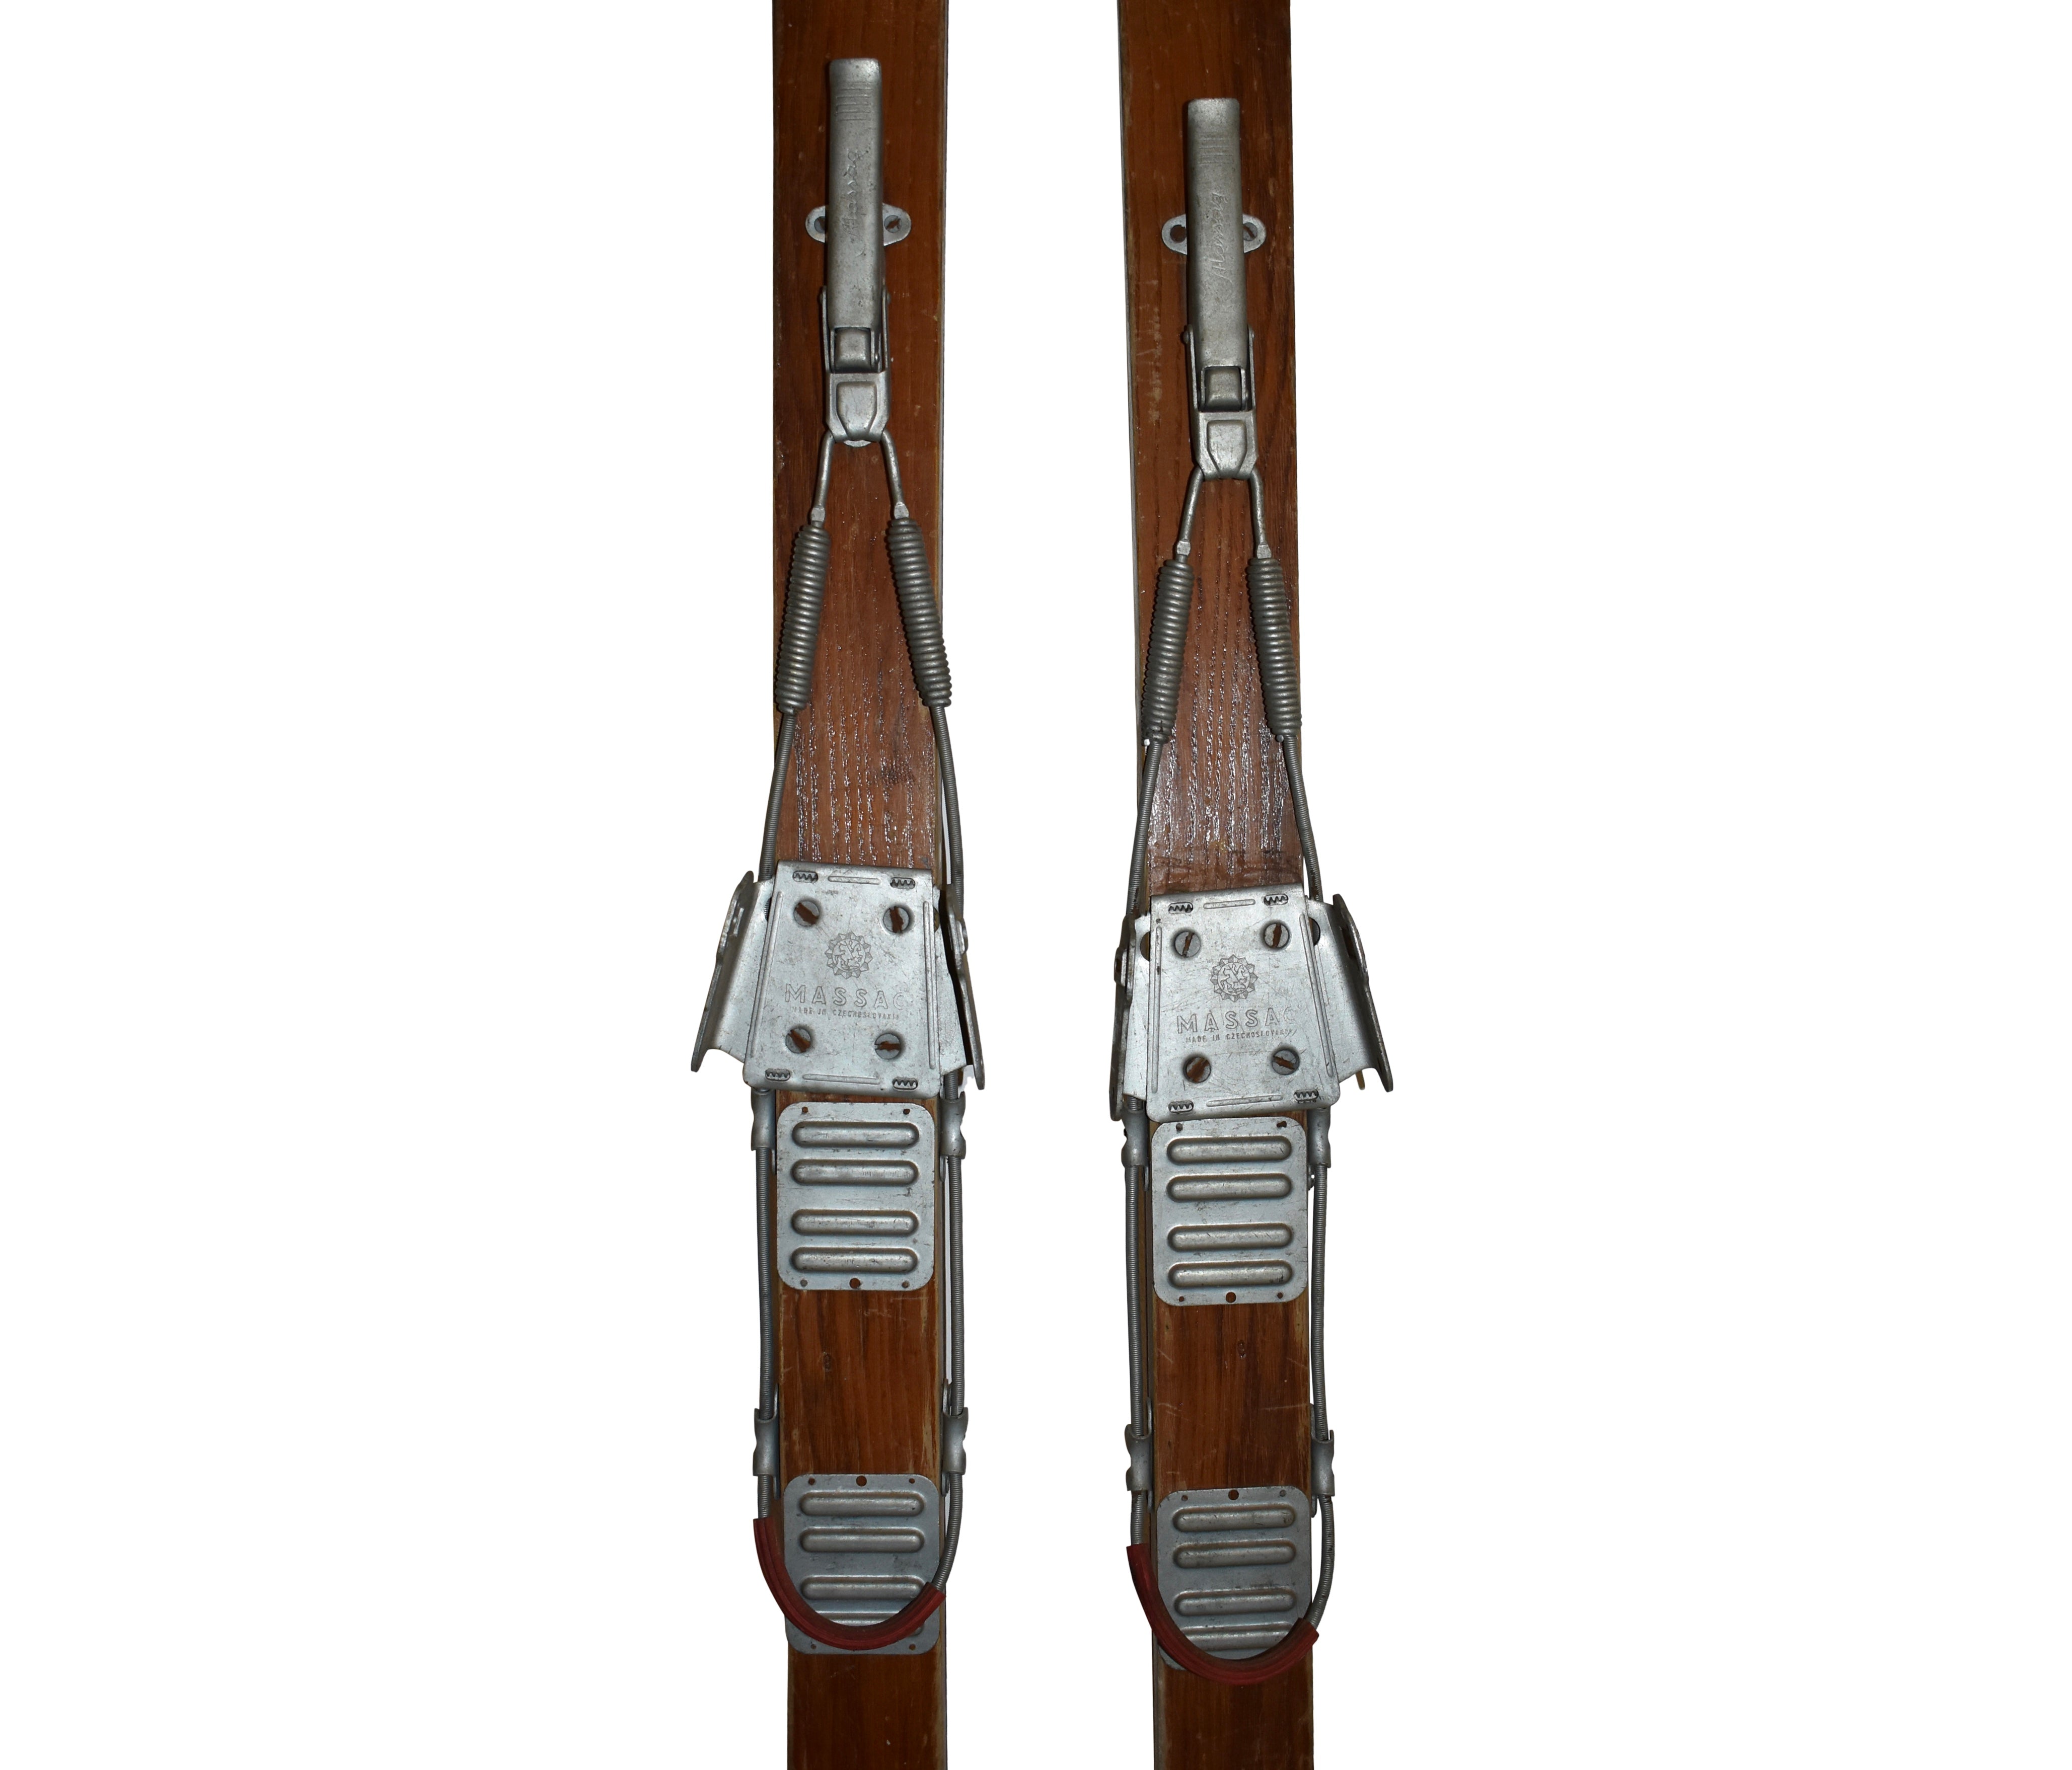 Junior Skis with Massag Cable Bindings